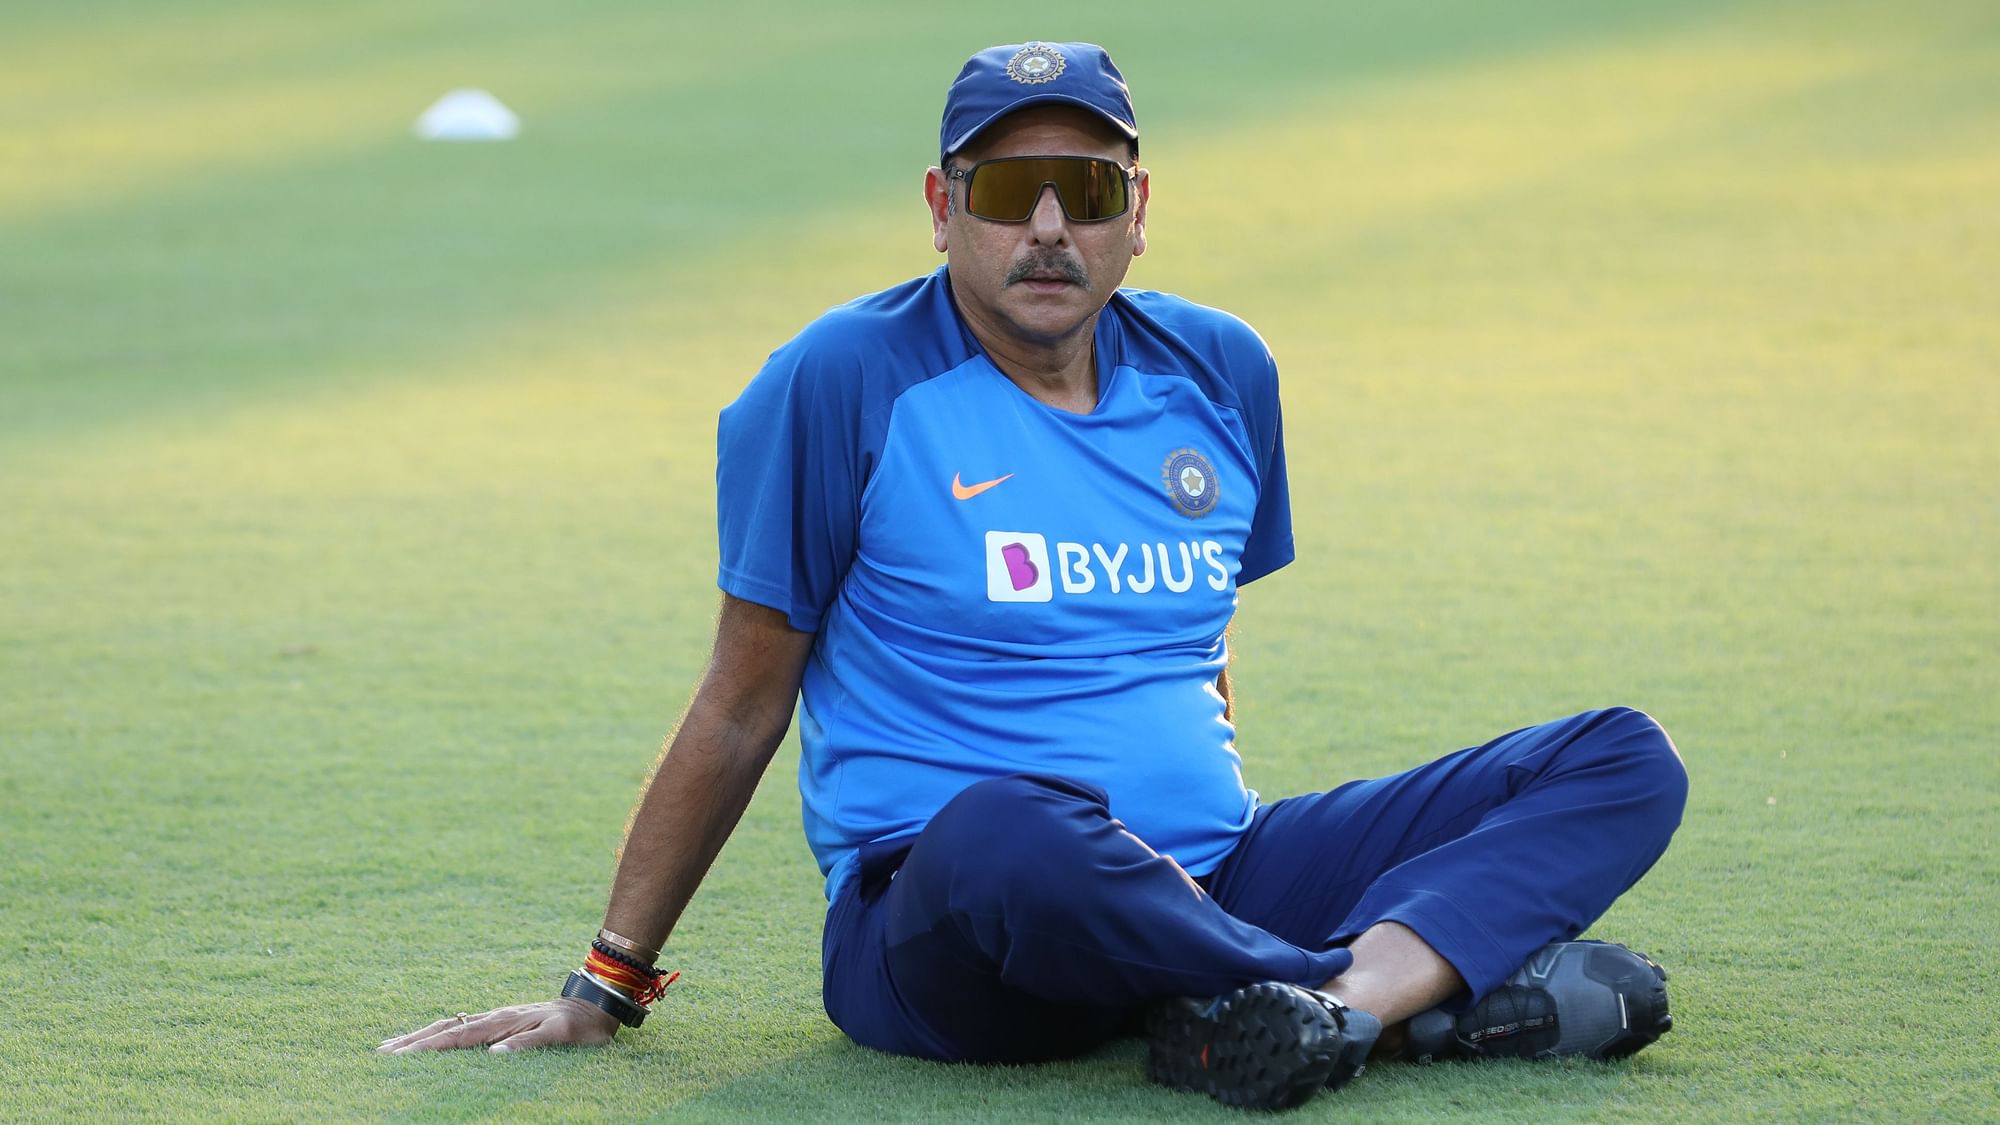 India head coach Ravi Shastri believes the focus of world cricket should be on playing bilateral series once the sport returns to the field.